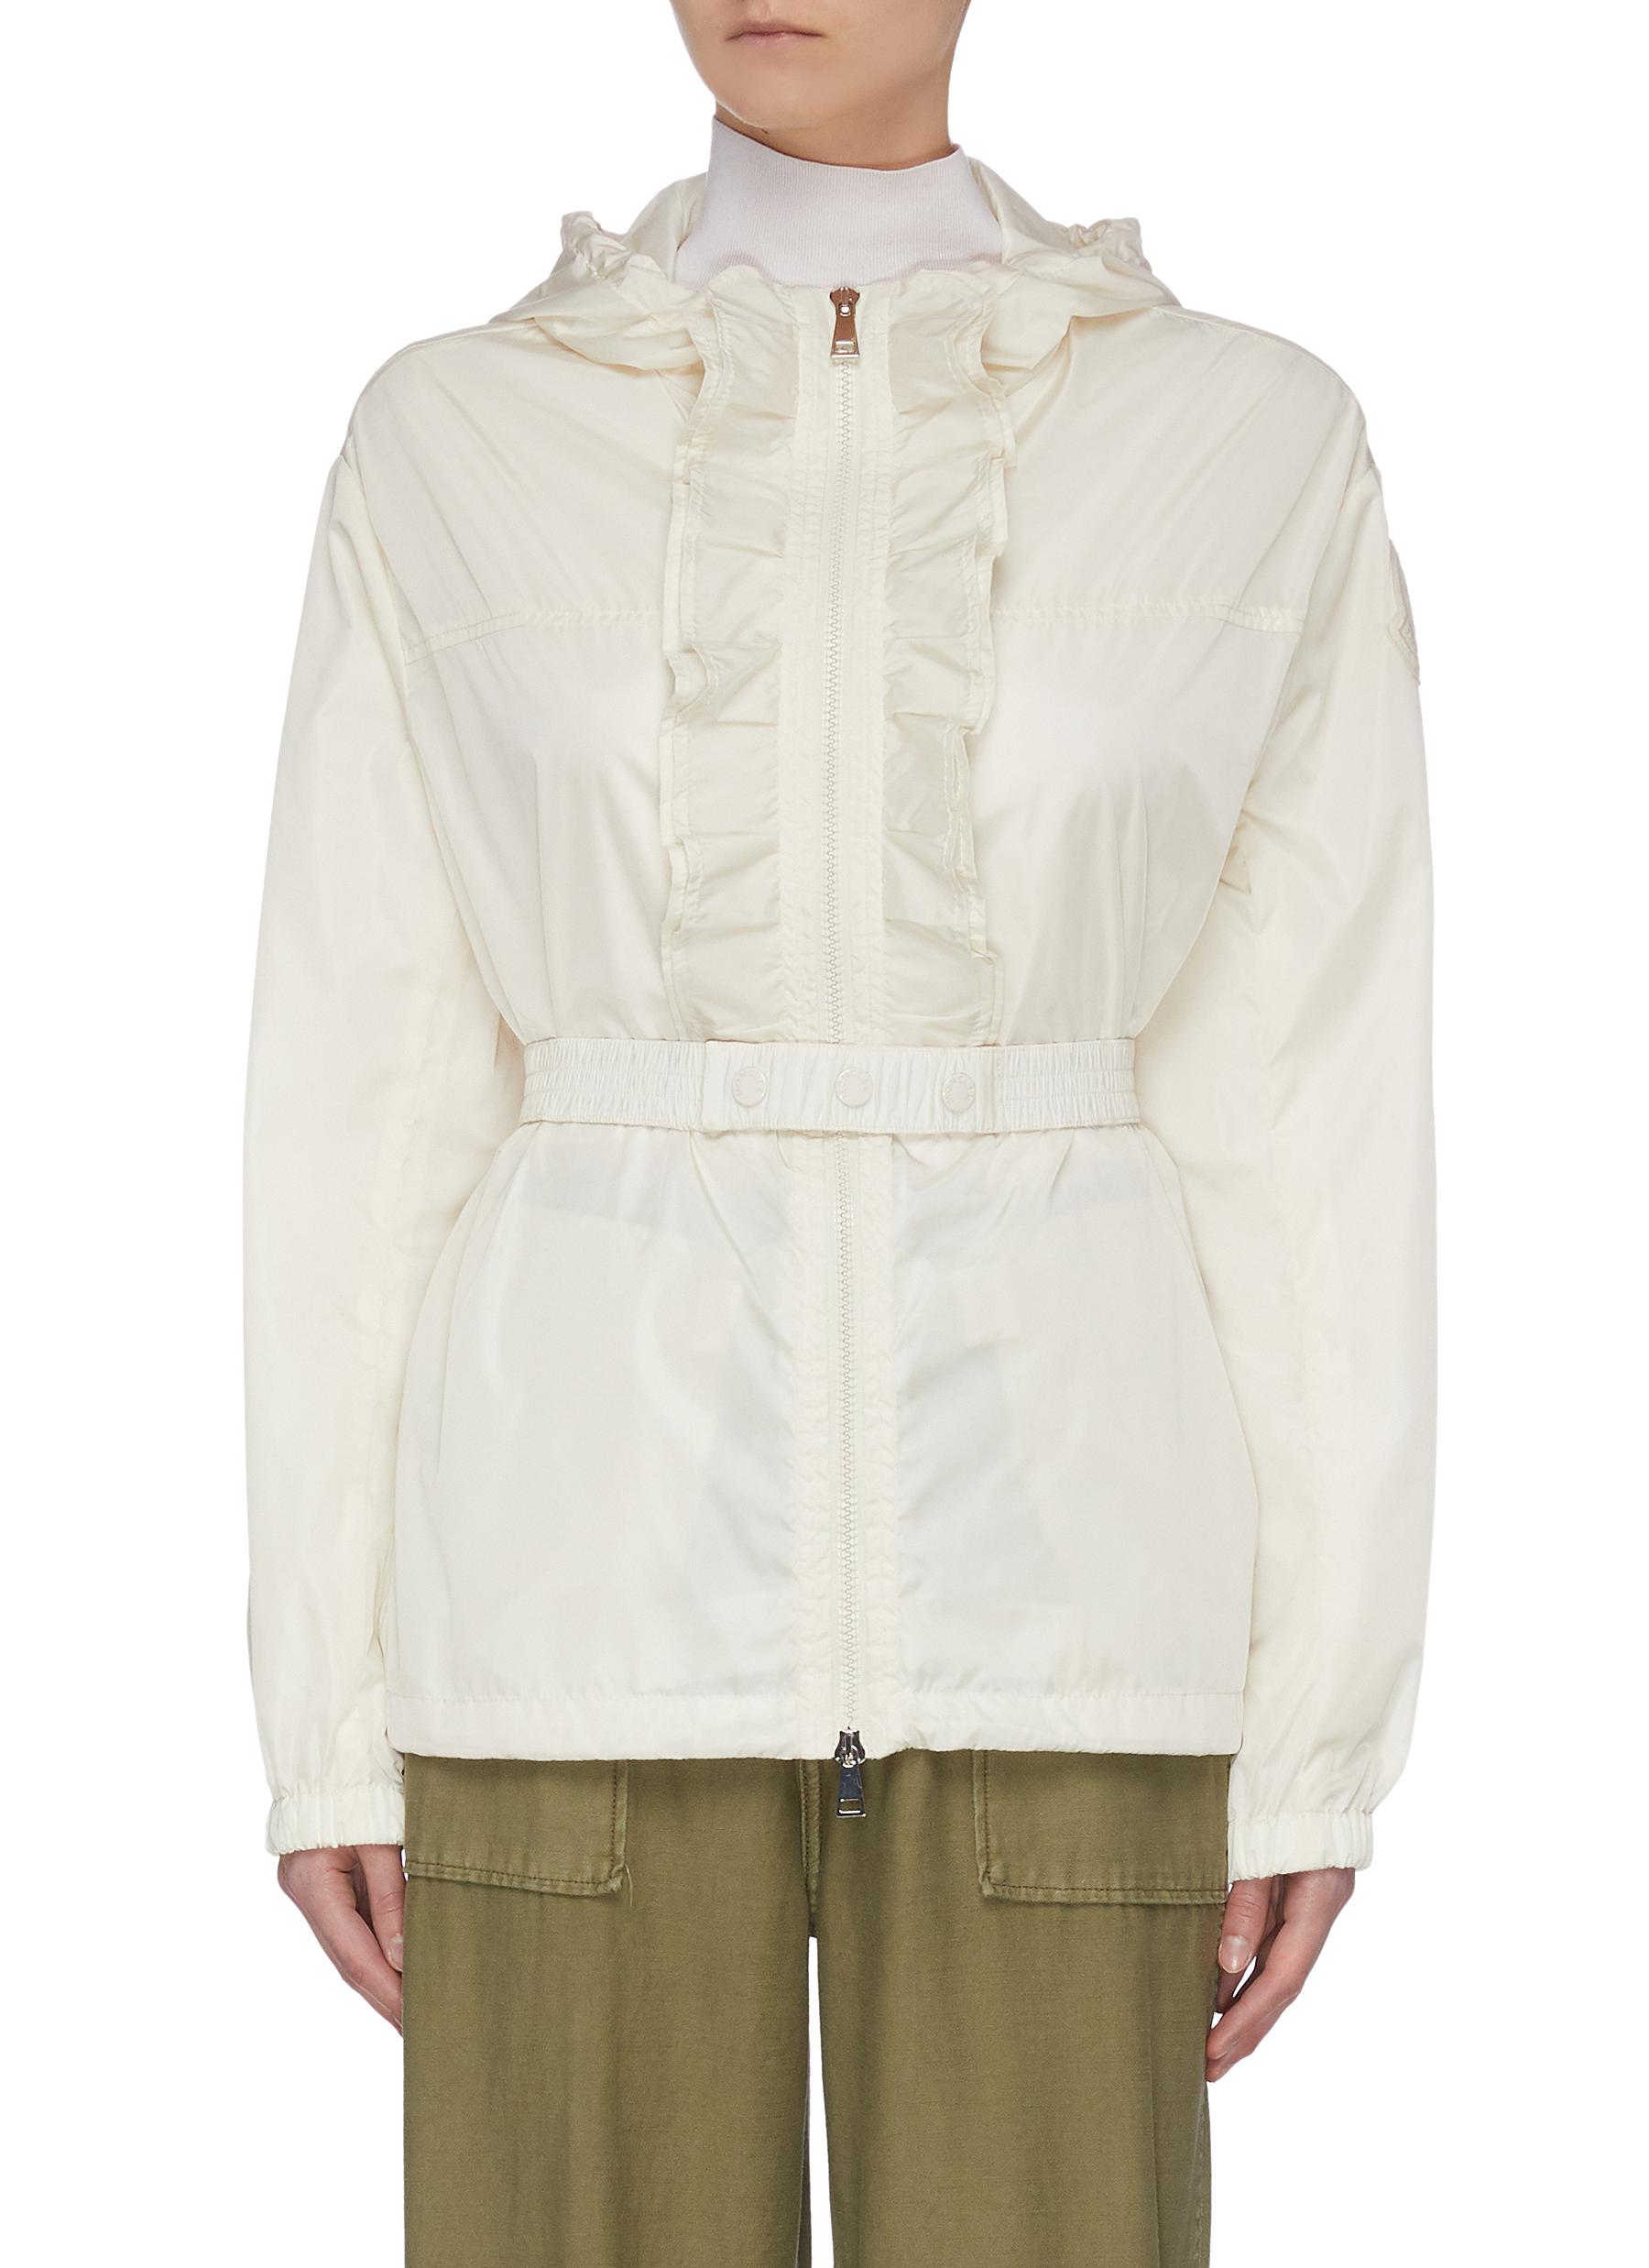 MONCLER | 'Cinabre' ruffle belted 